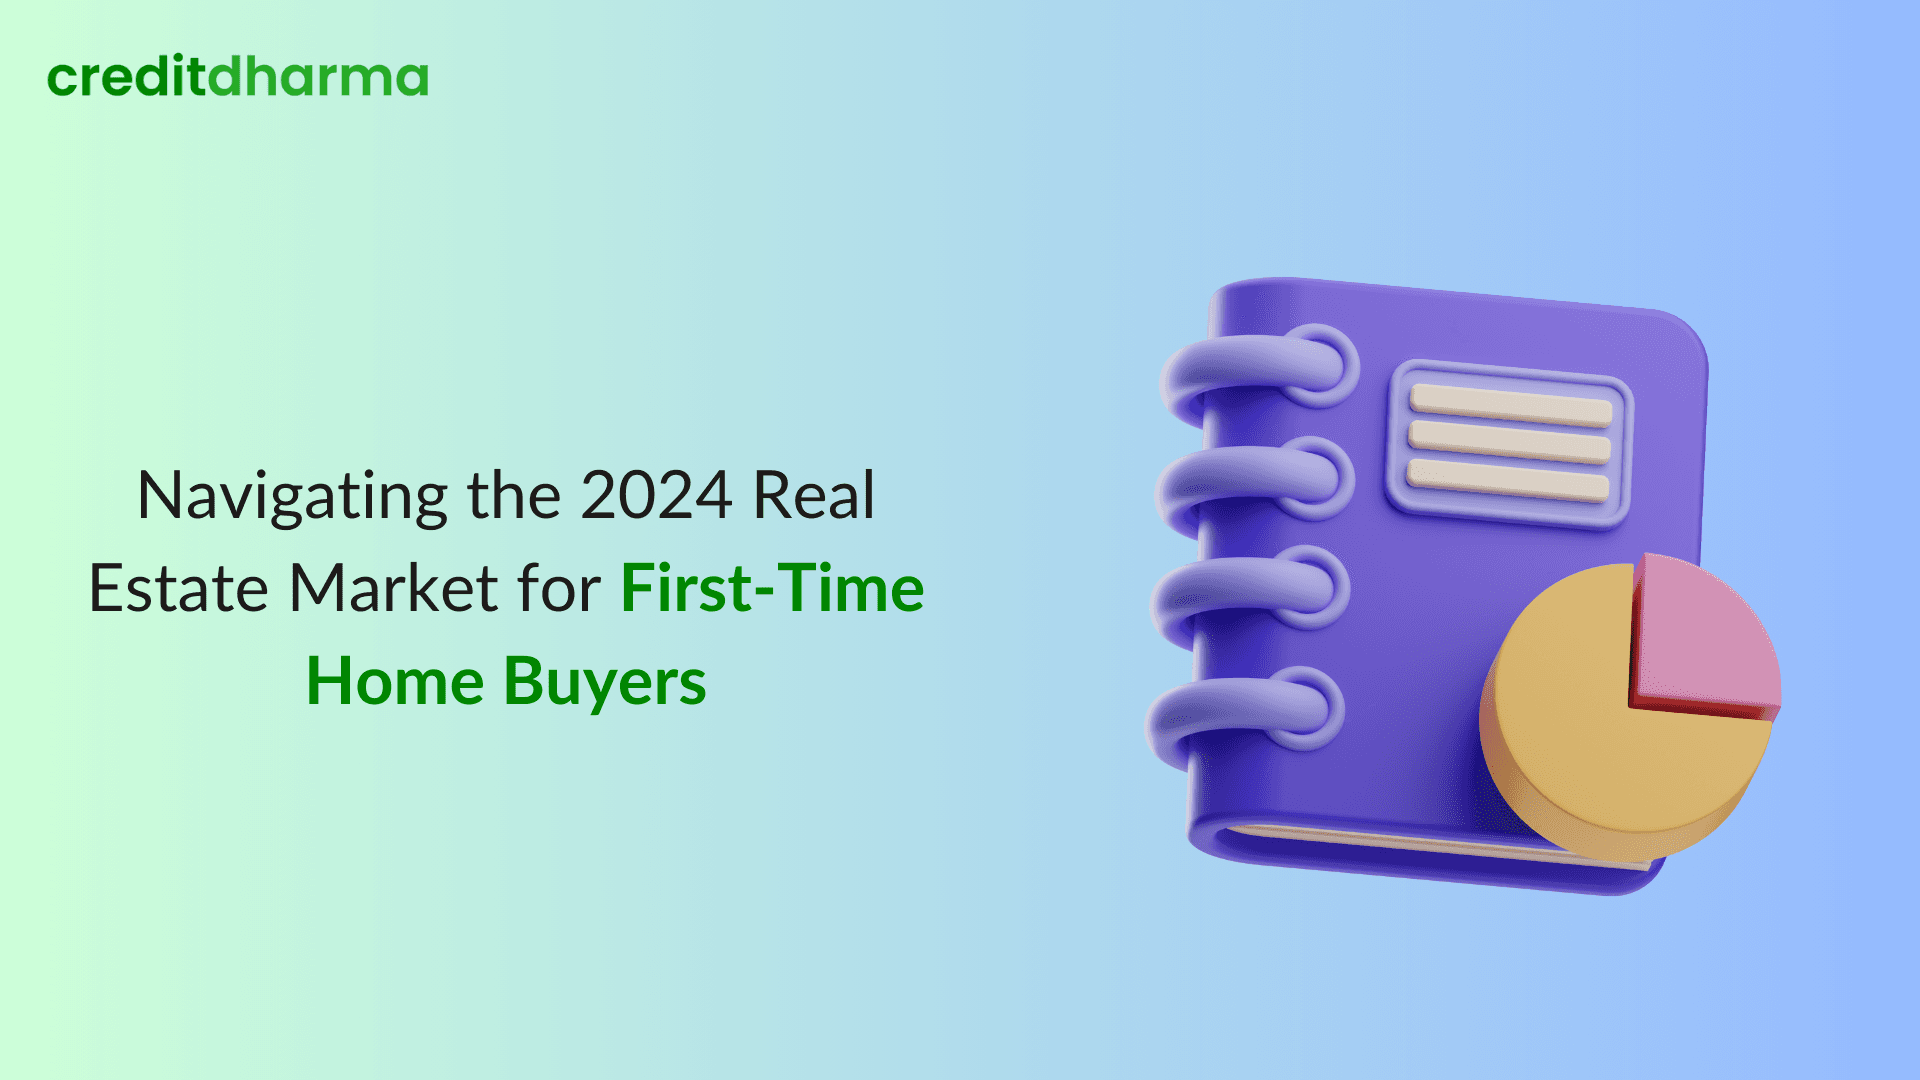 Cover Image for Navigating the 2024 Real Estate Market for First-Time Home Buyers